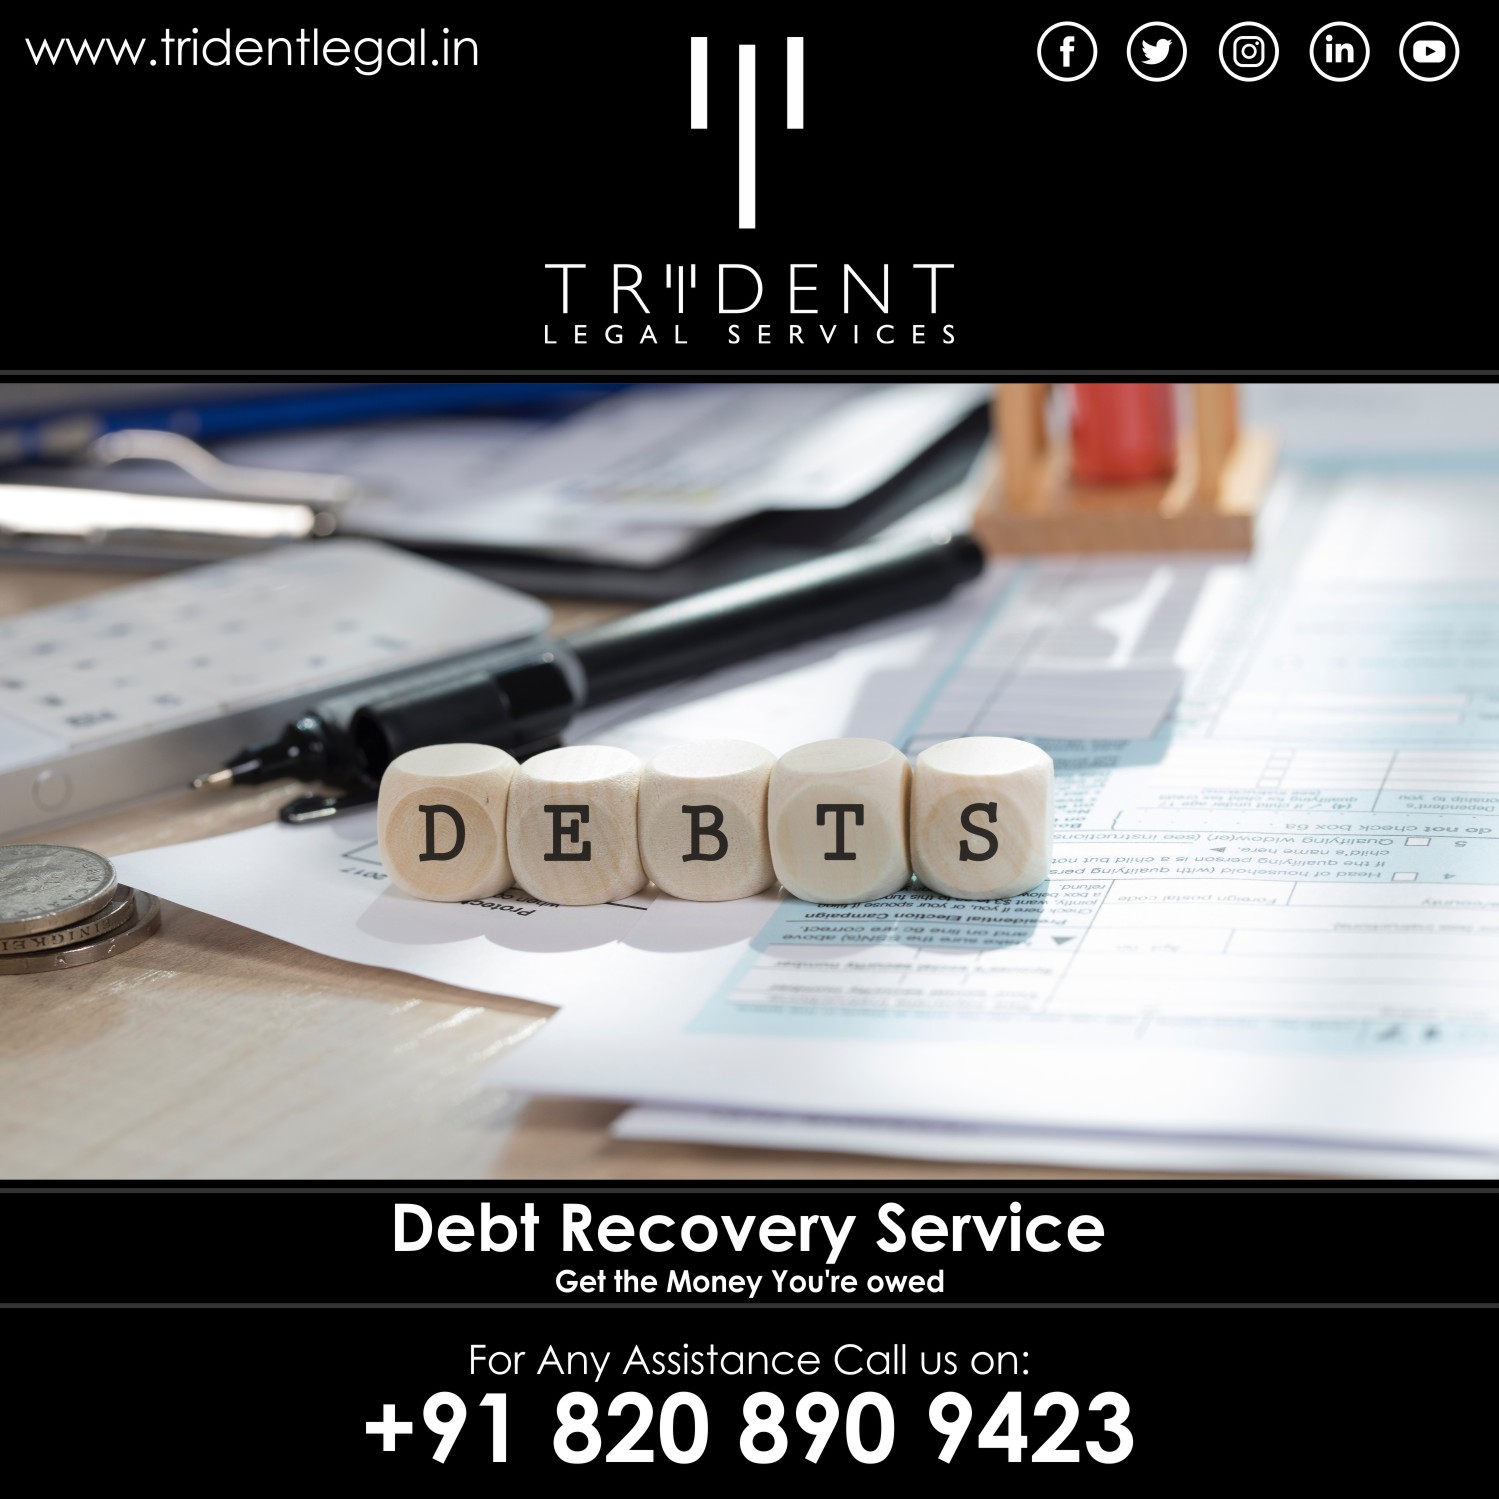 Debt Recovery Service in Pune